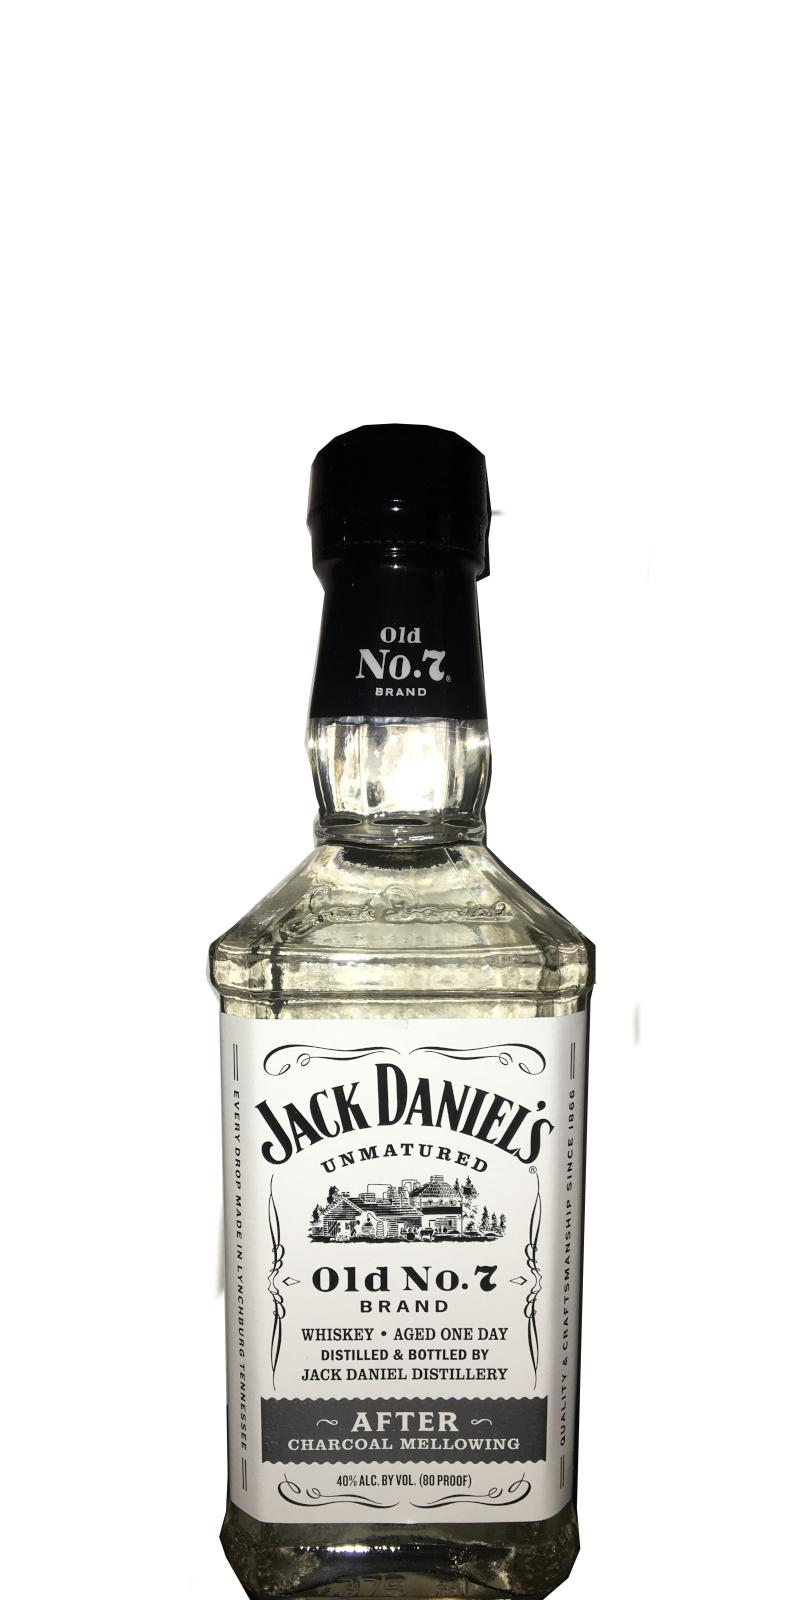 Jack Daniel's After Charcoal Mellowing 40% 375ml